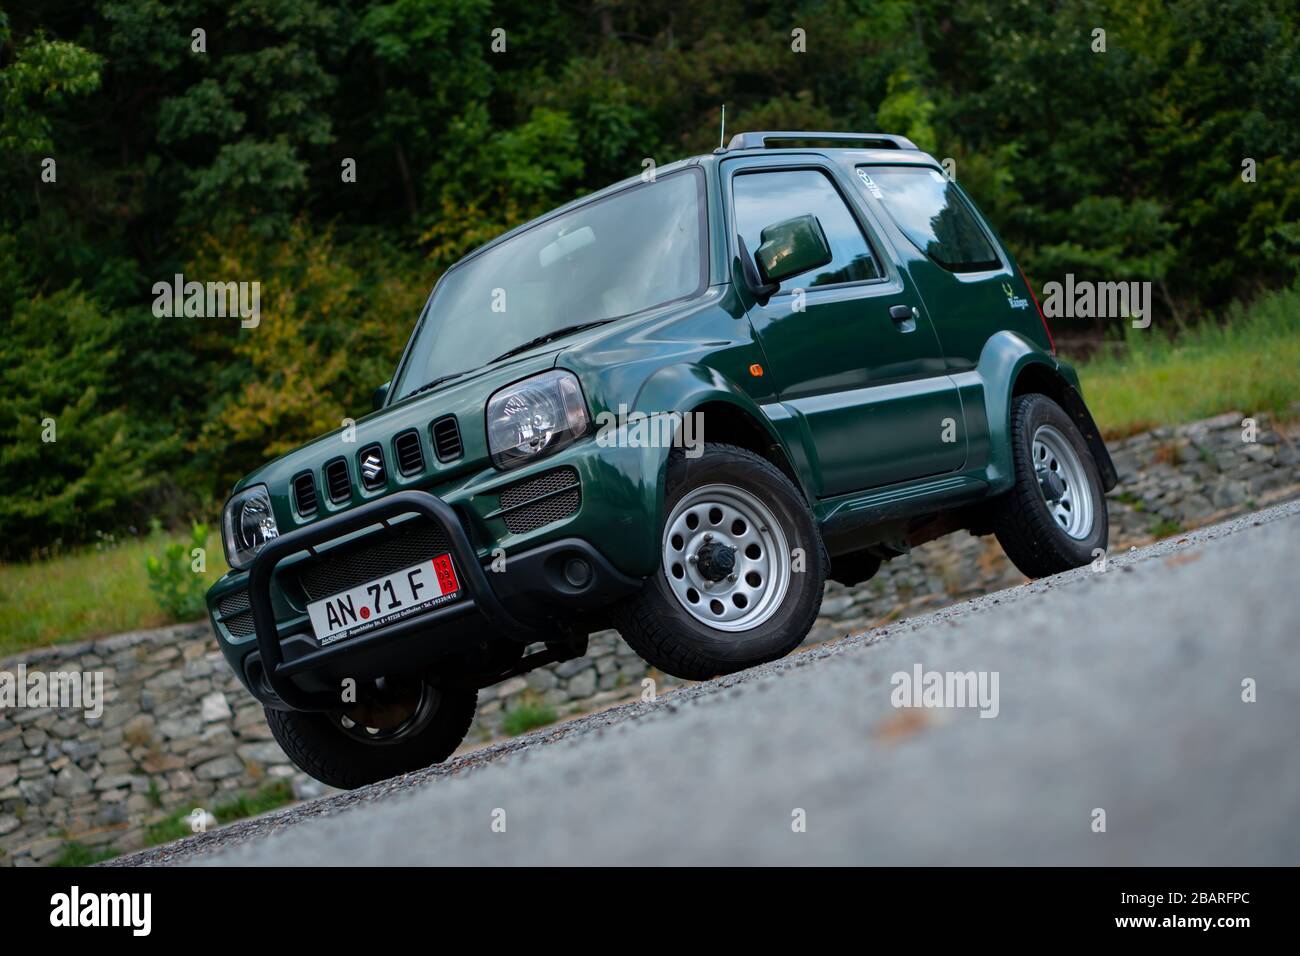 Cluj Napoca Cluj Romania 08 29 19 Suzuki Jimny 4 Wheel Drive A Small Car With Off Road Capabilities Isolated In An Empty Parking Lot Photo Session Stock Photo Alamy